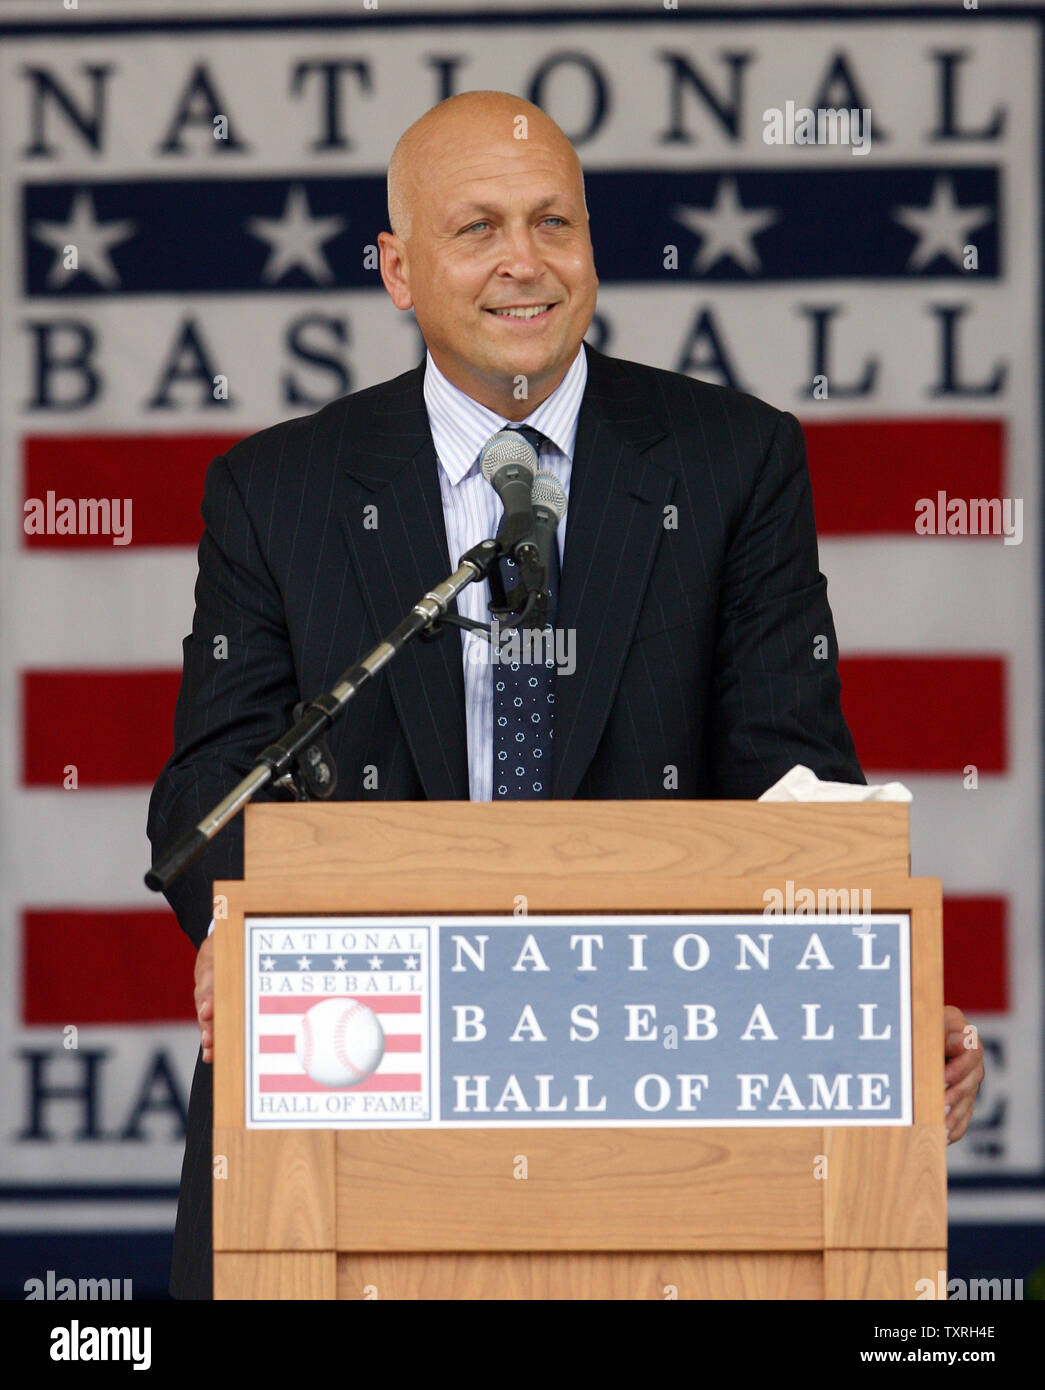 National Baseball Hall of Fame's newest member Cal Ripken Jr., delivers his speech during induction ceremonies in Cooperstown, New York on July 29, 2007.  (UPI Photo/Bill Greenblatt) Stock Photo